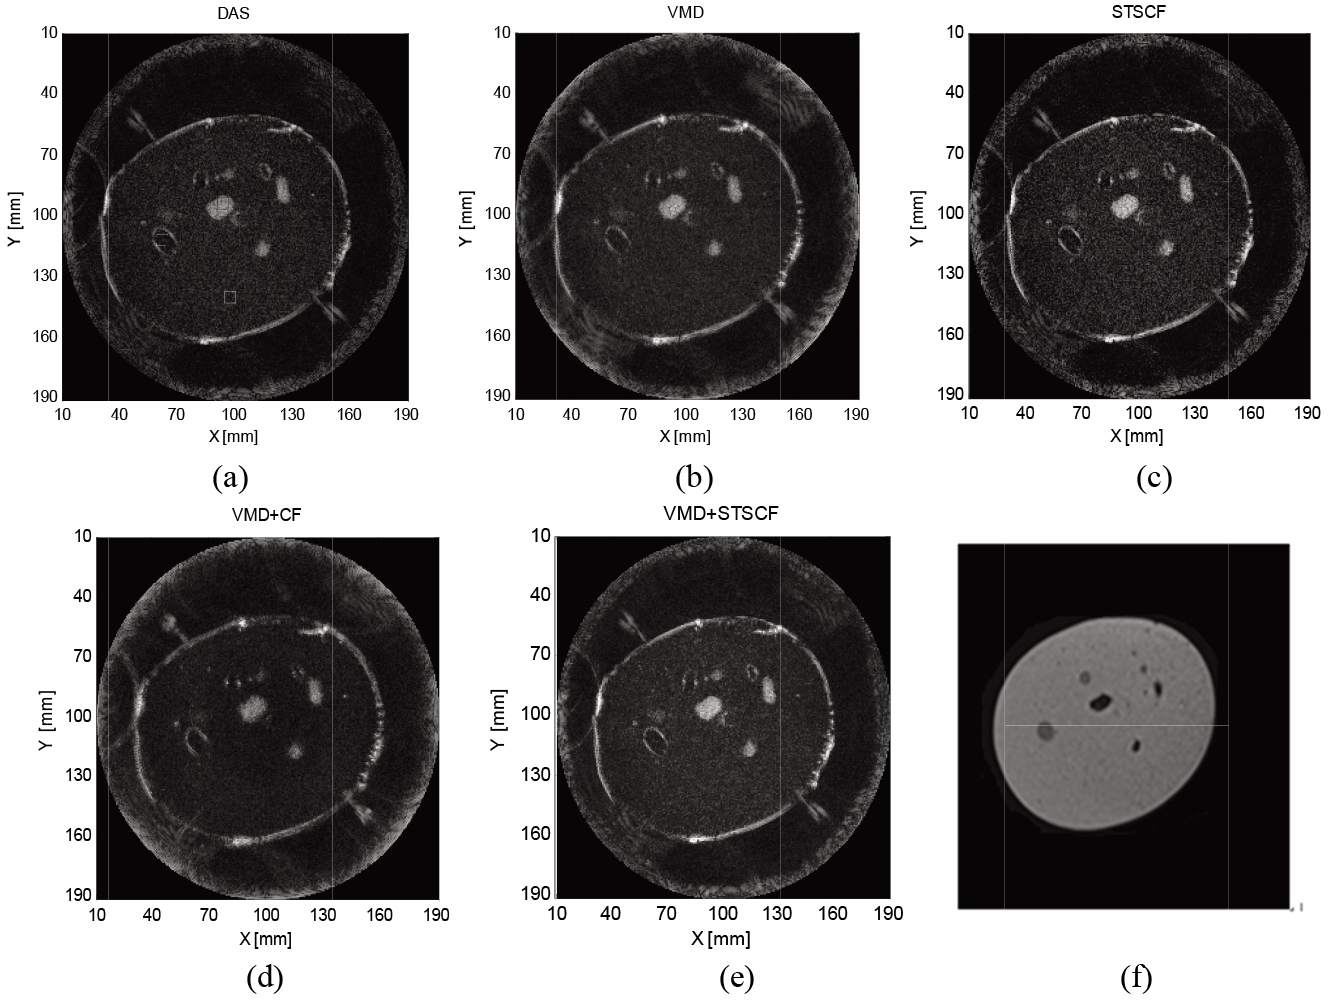 Reconstructed images of breast phantom by (a) DAS; (b) VMD; (c) STSCF; (d) VMD+CF; (e) VMD+STSCF; (f) MRI.